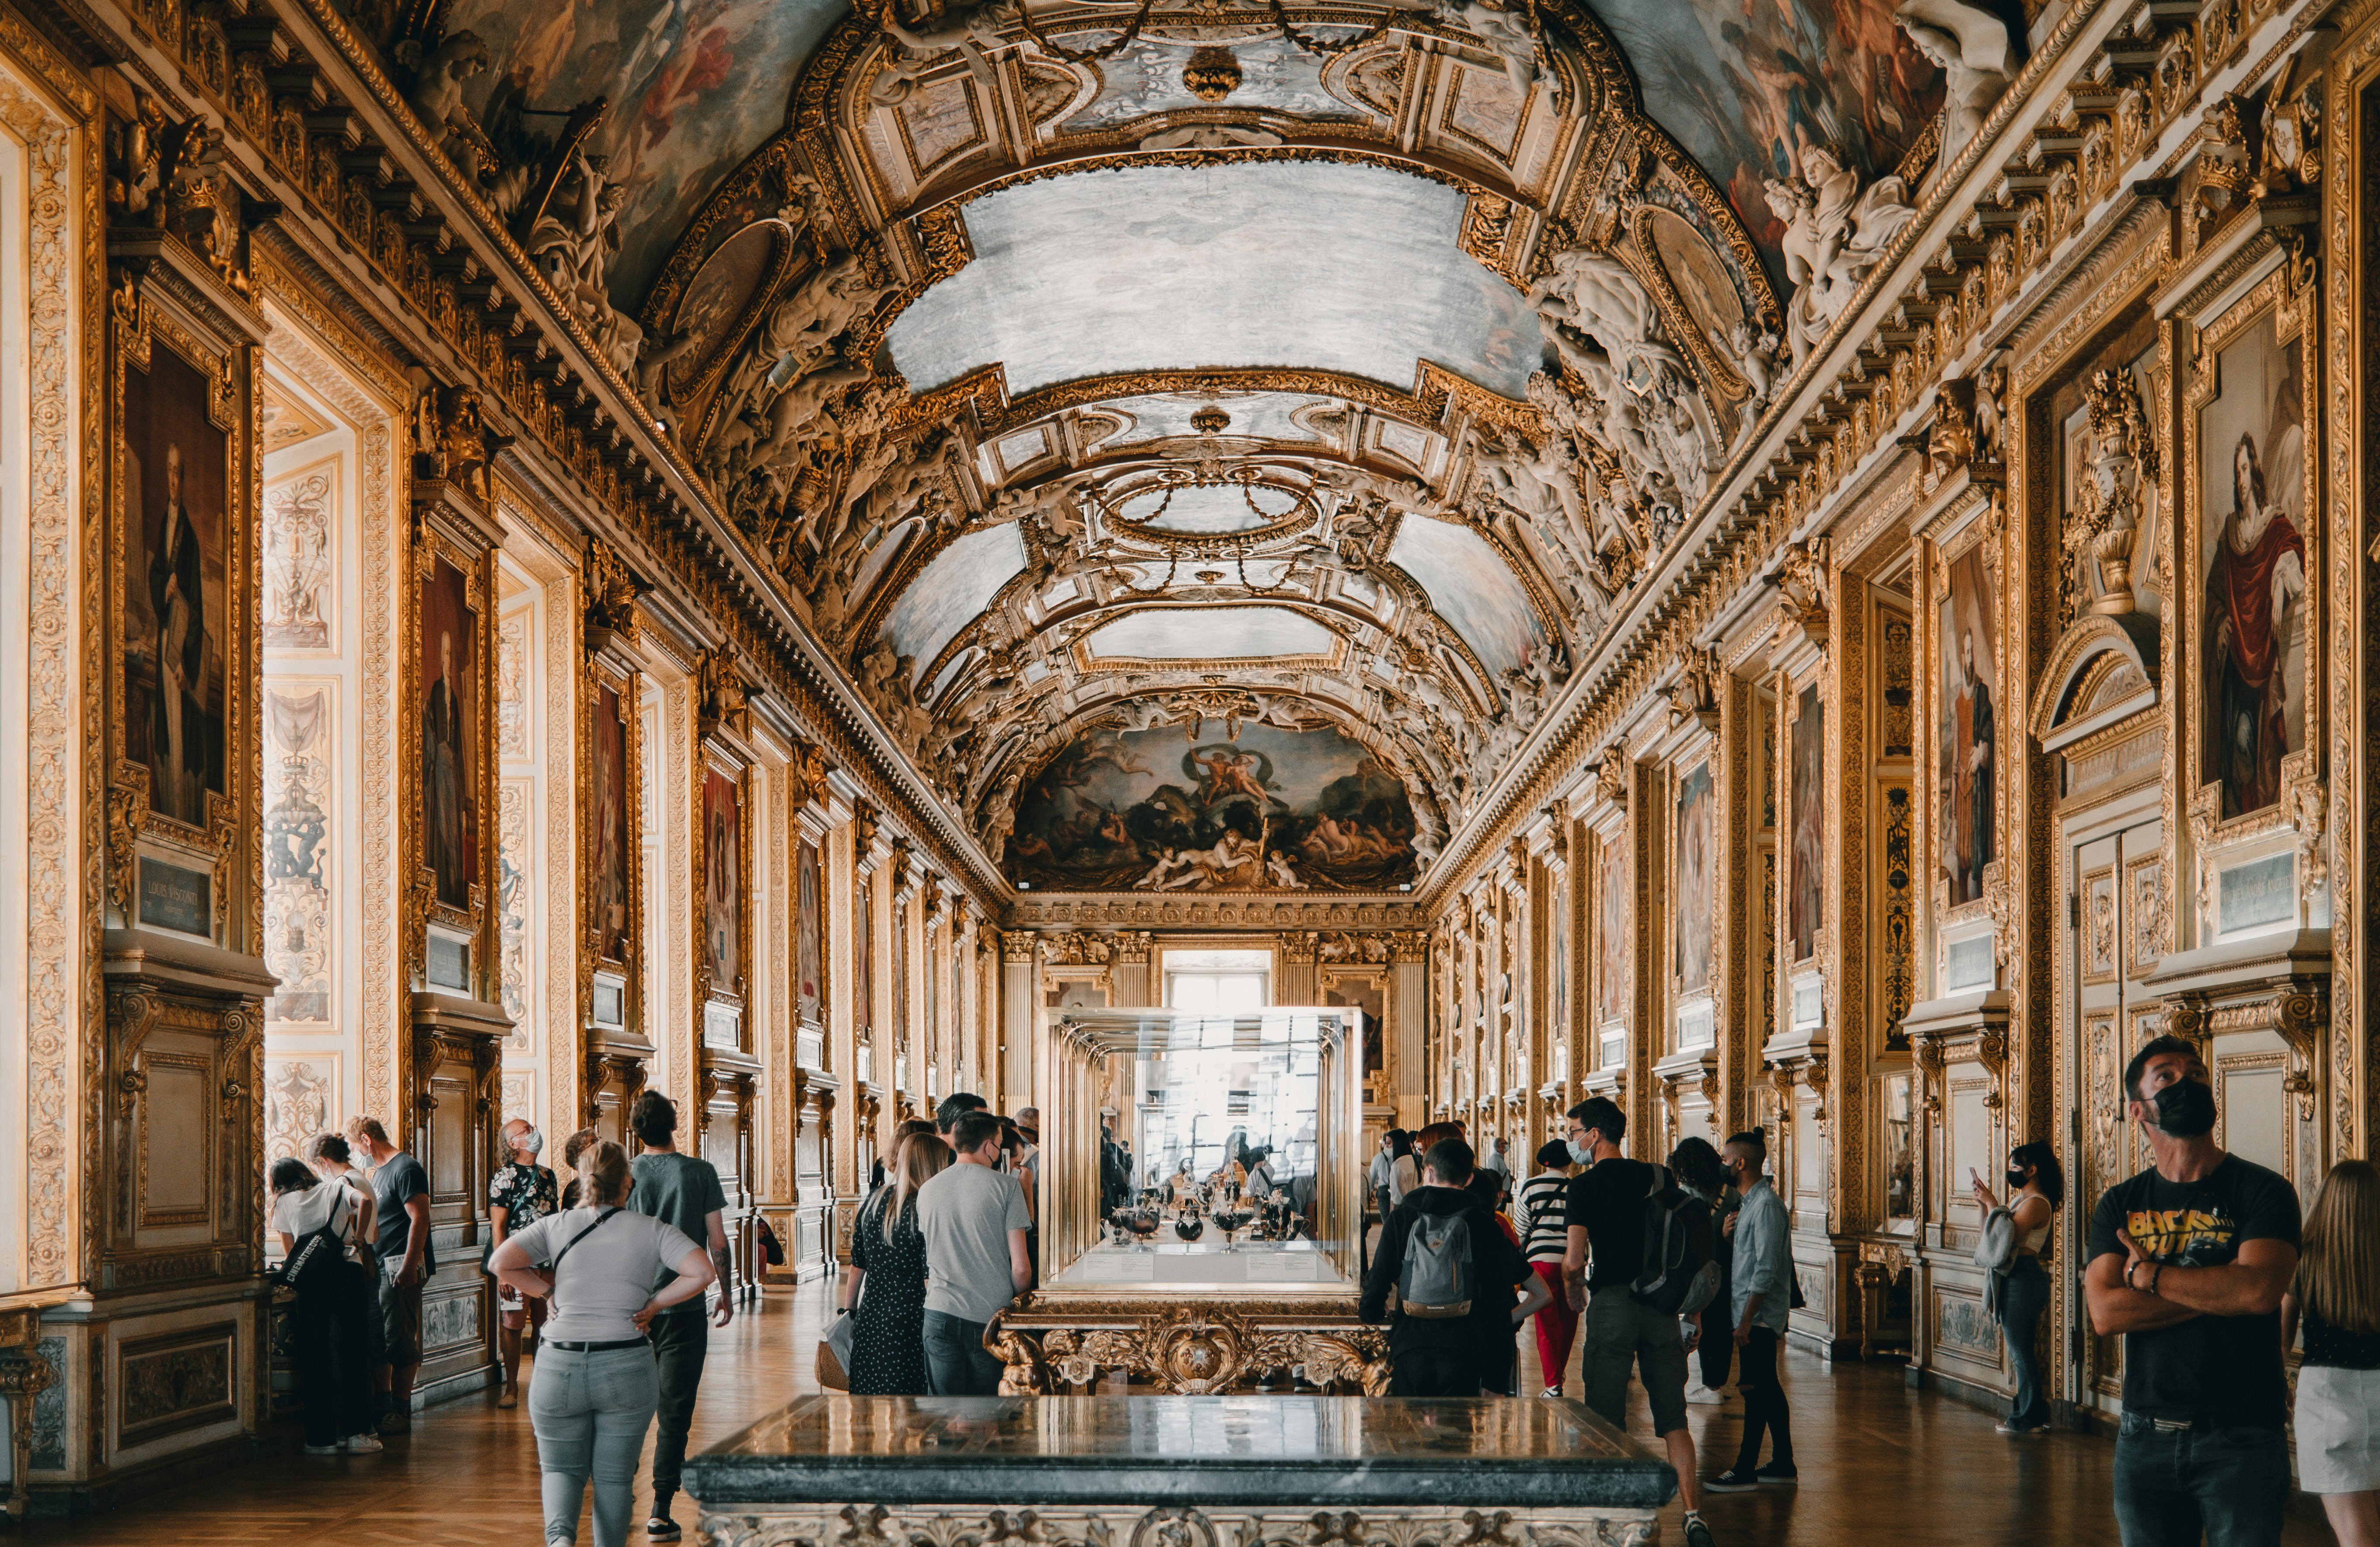 Inside the stunning galleries of the Louvre, old frech architecture reaches vaultd ceilings above museum guests and exhibit cases.